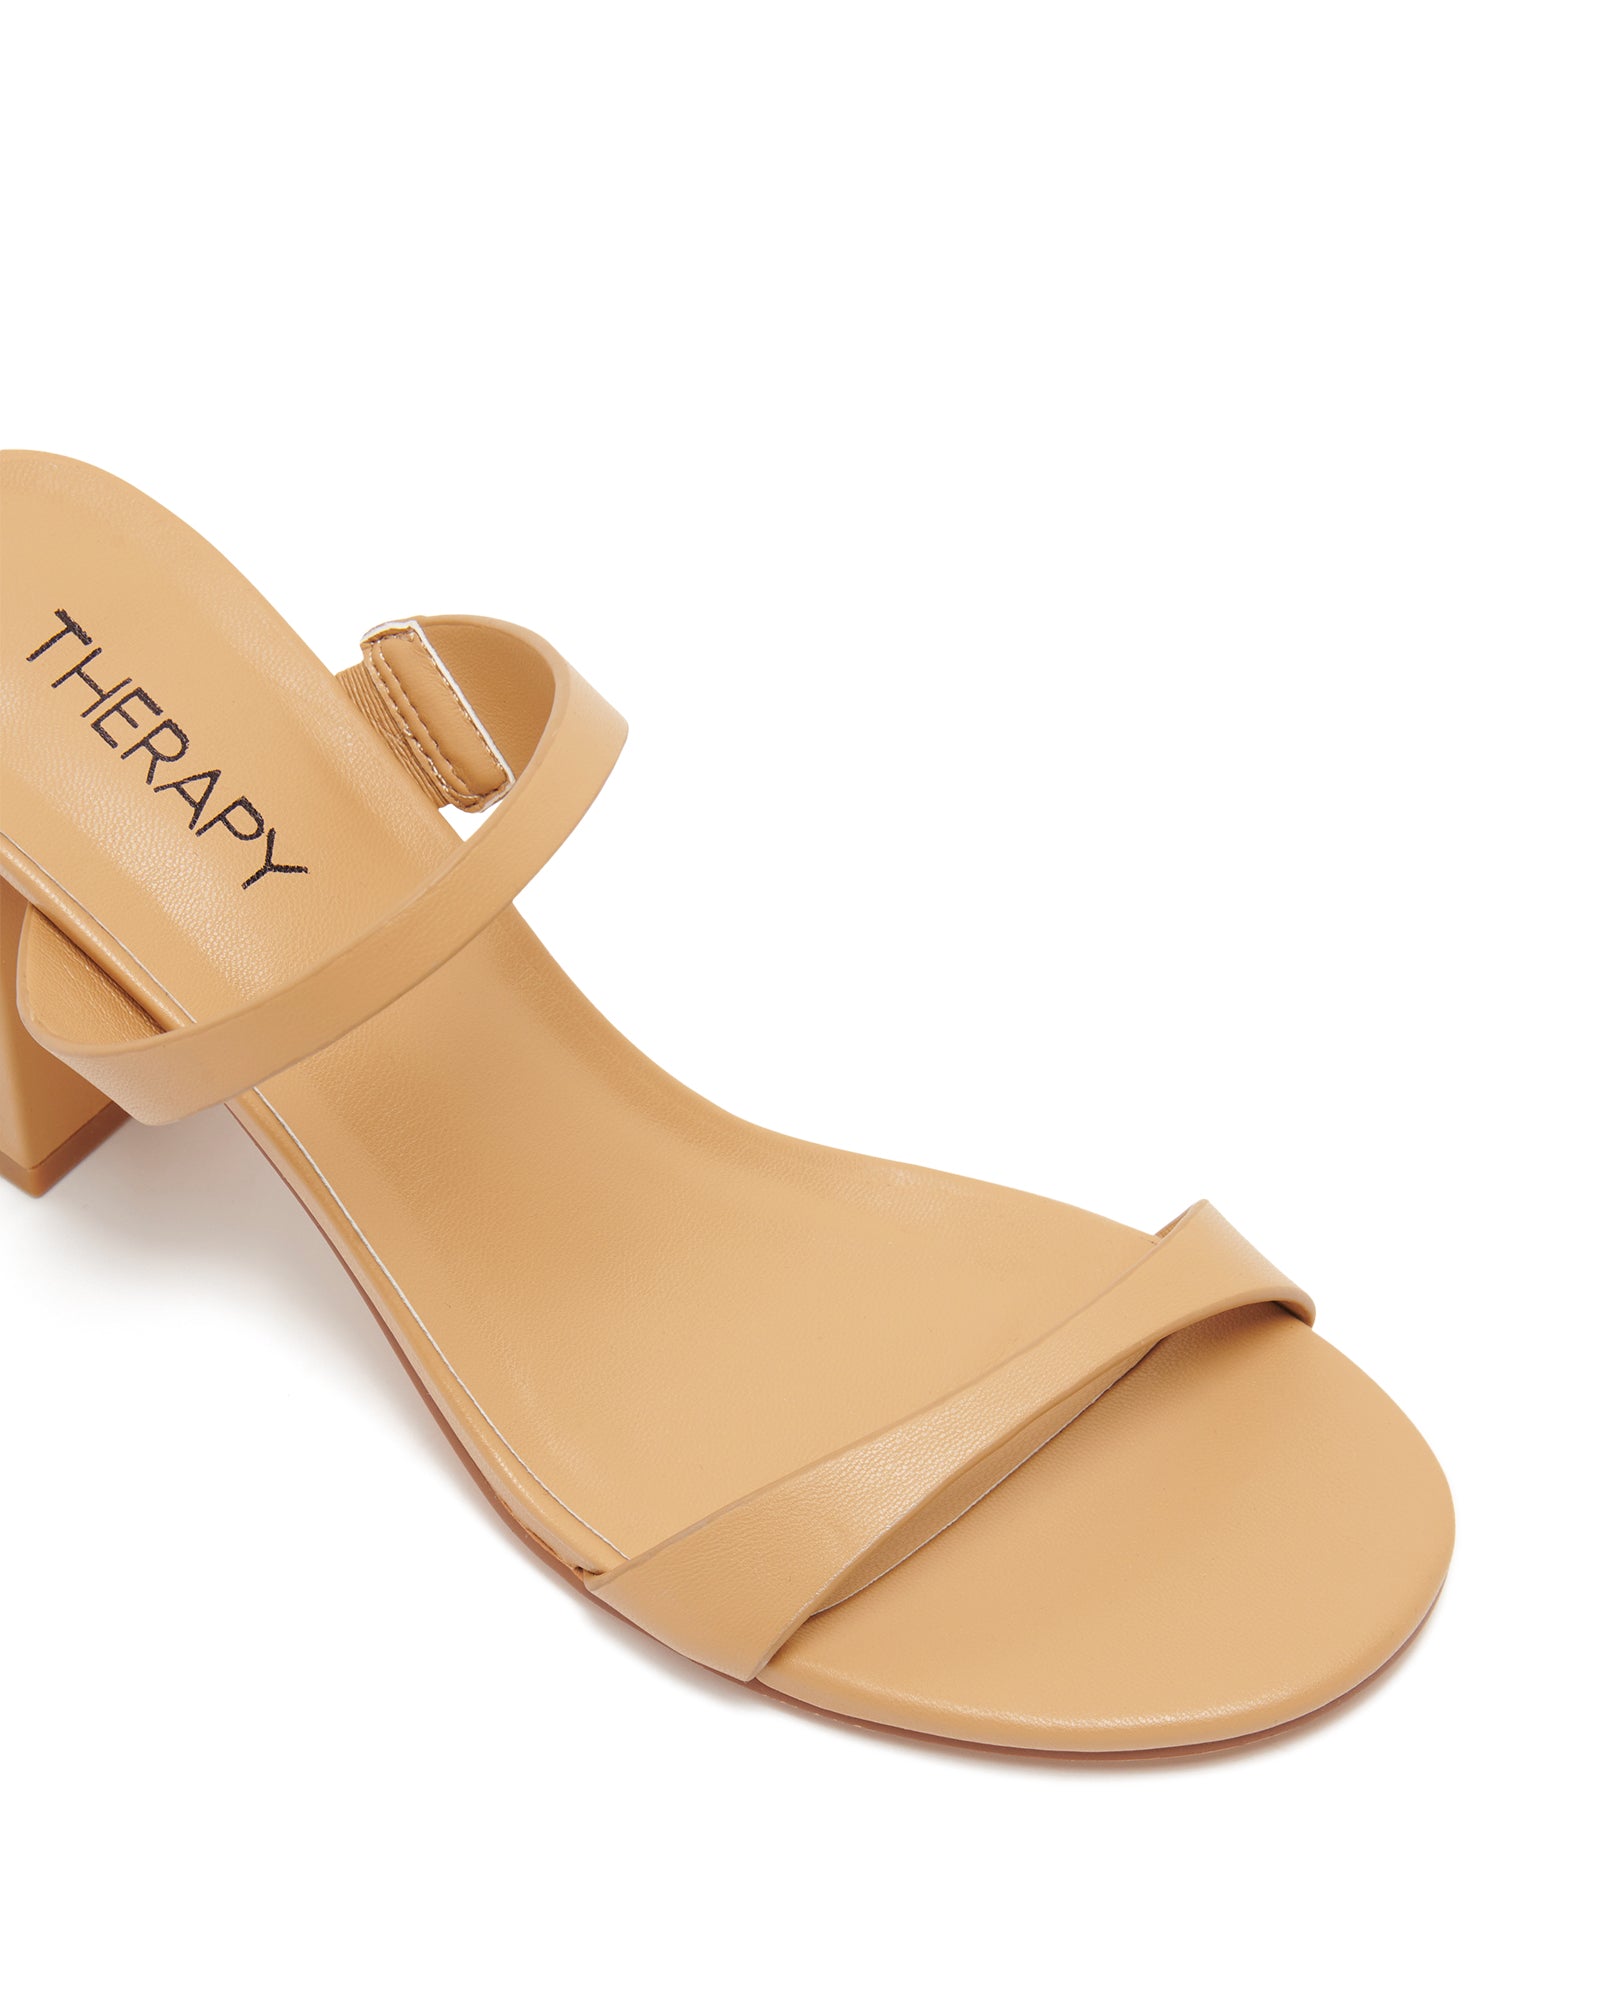 Therapy Shoes Kirra Caramel Smooth | Women's Heels | Sandals | Mules